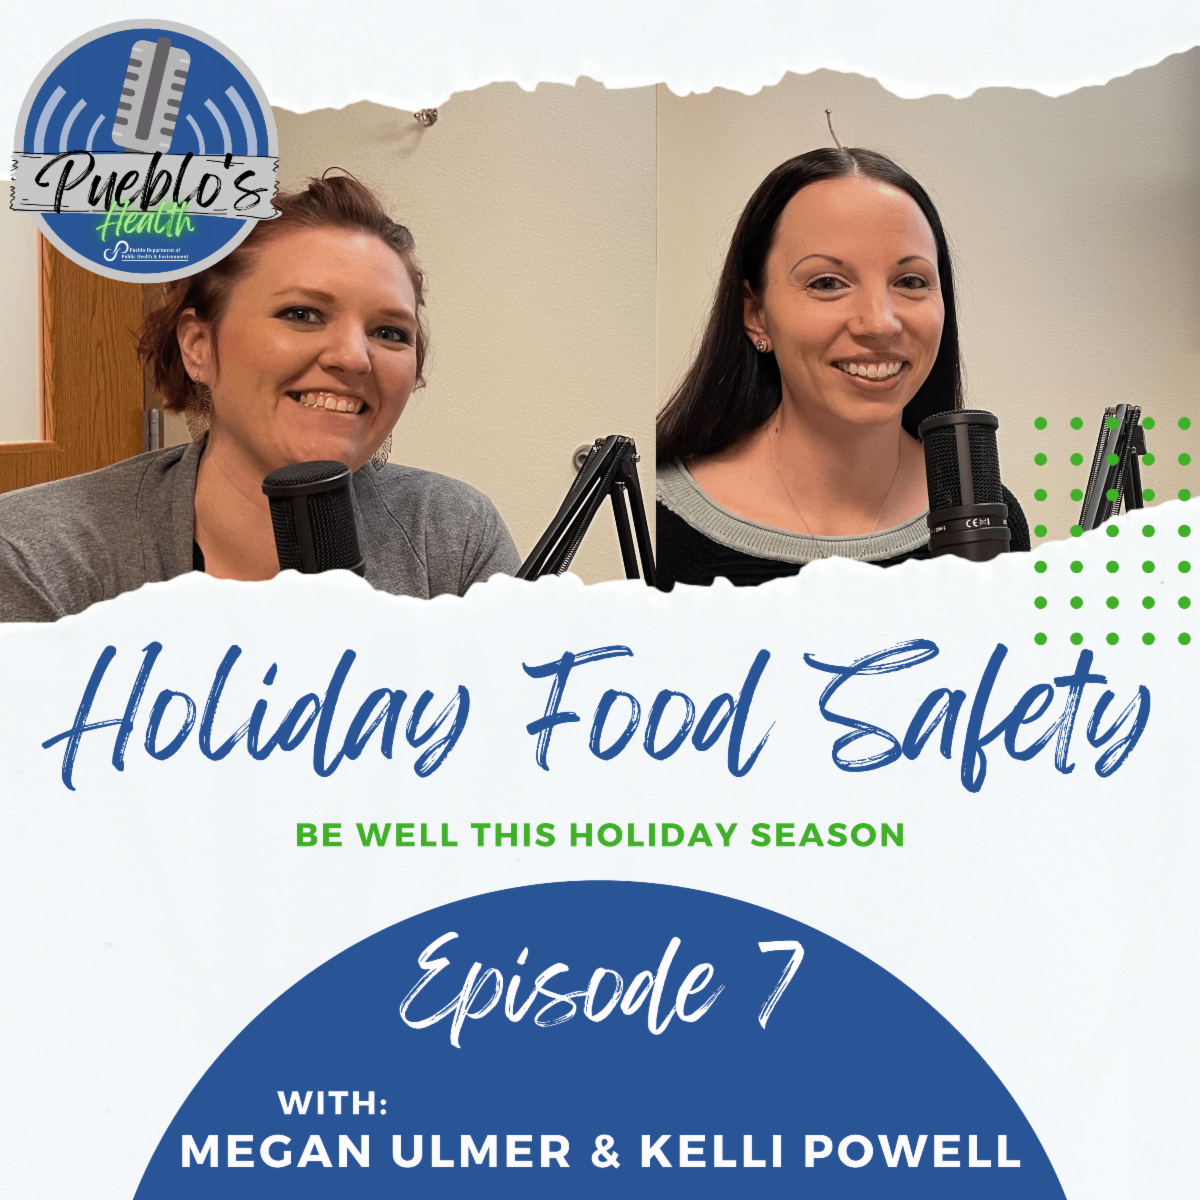 Holiday Food Safety - Be Well This Holiday Season